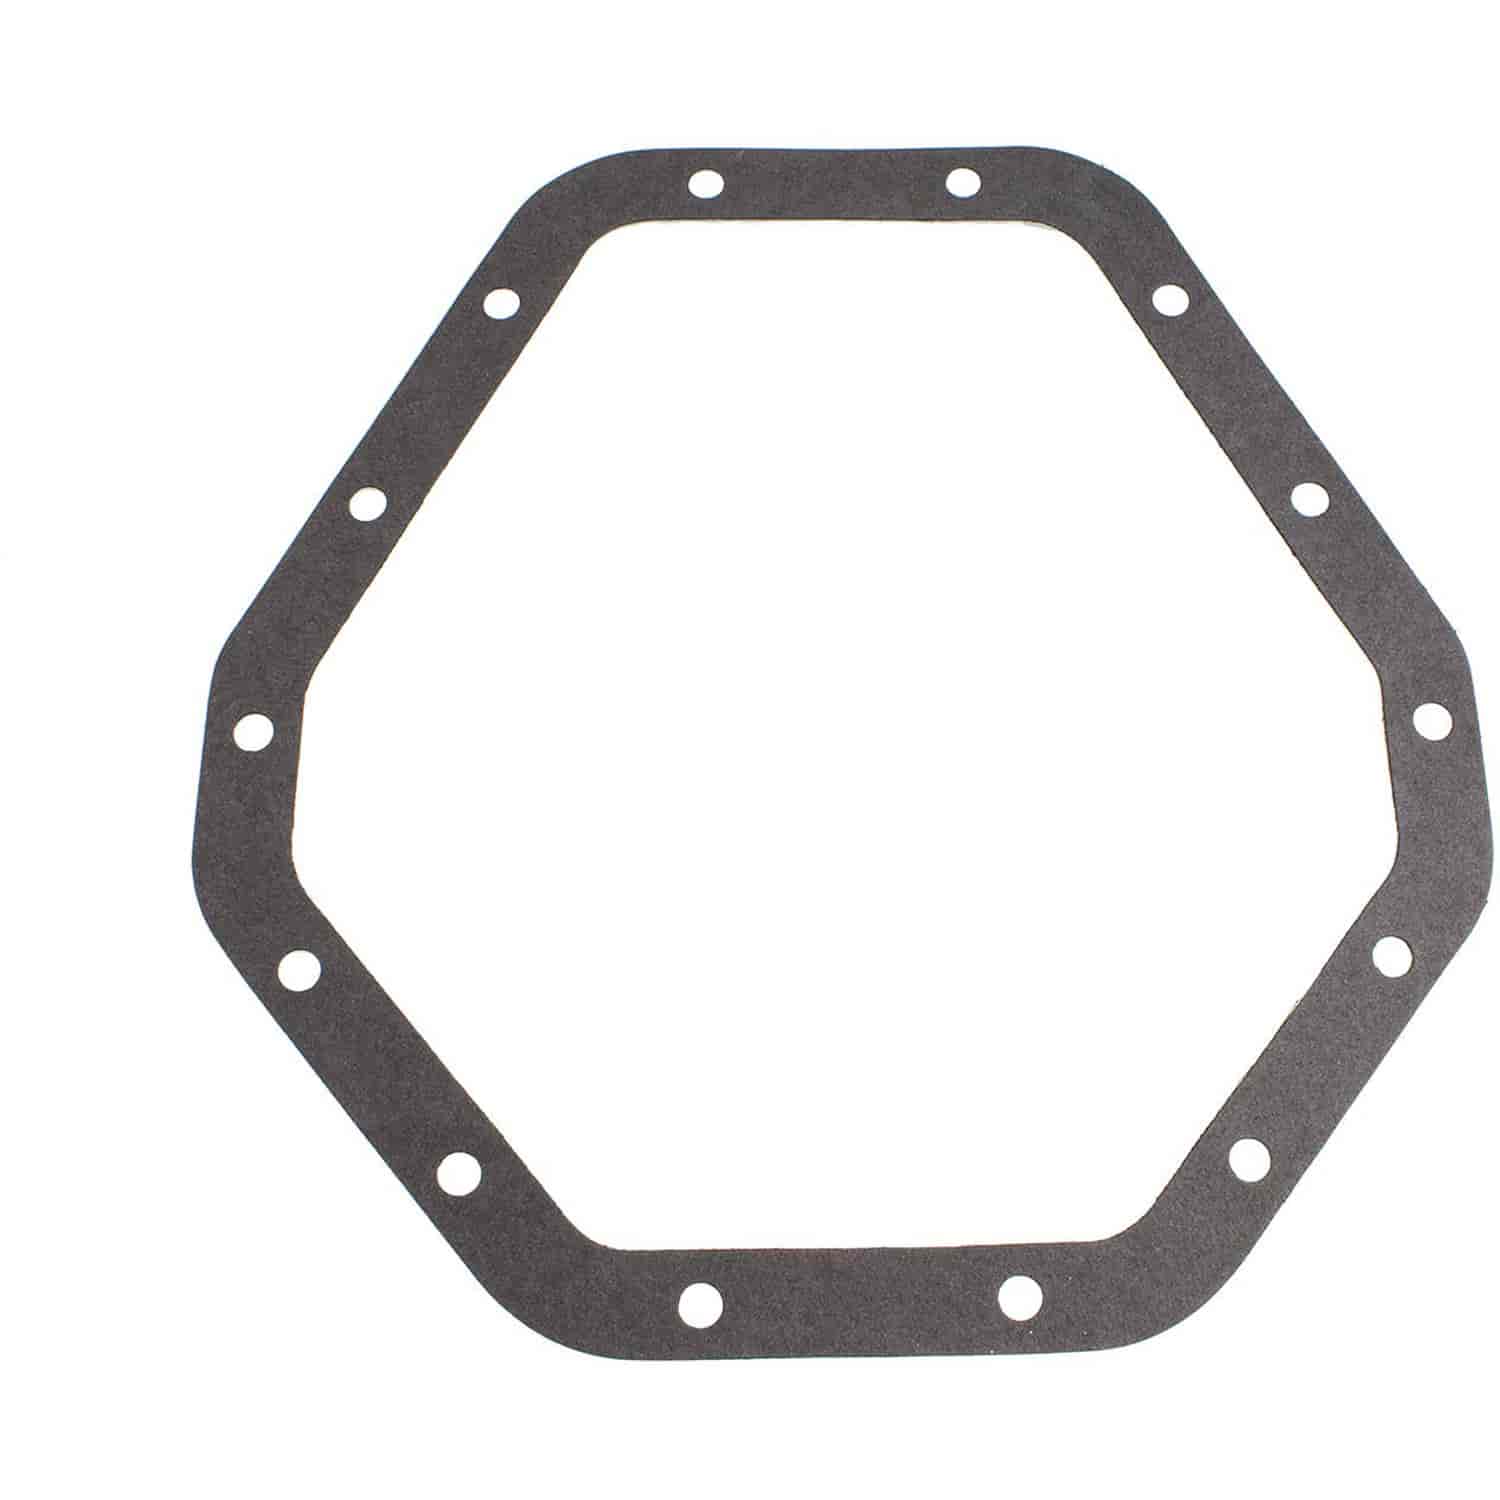 GASKET DIFF COVER 10.5